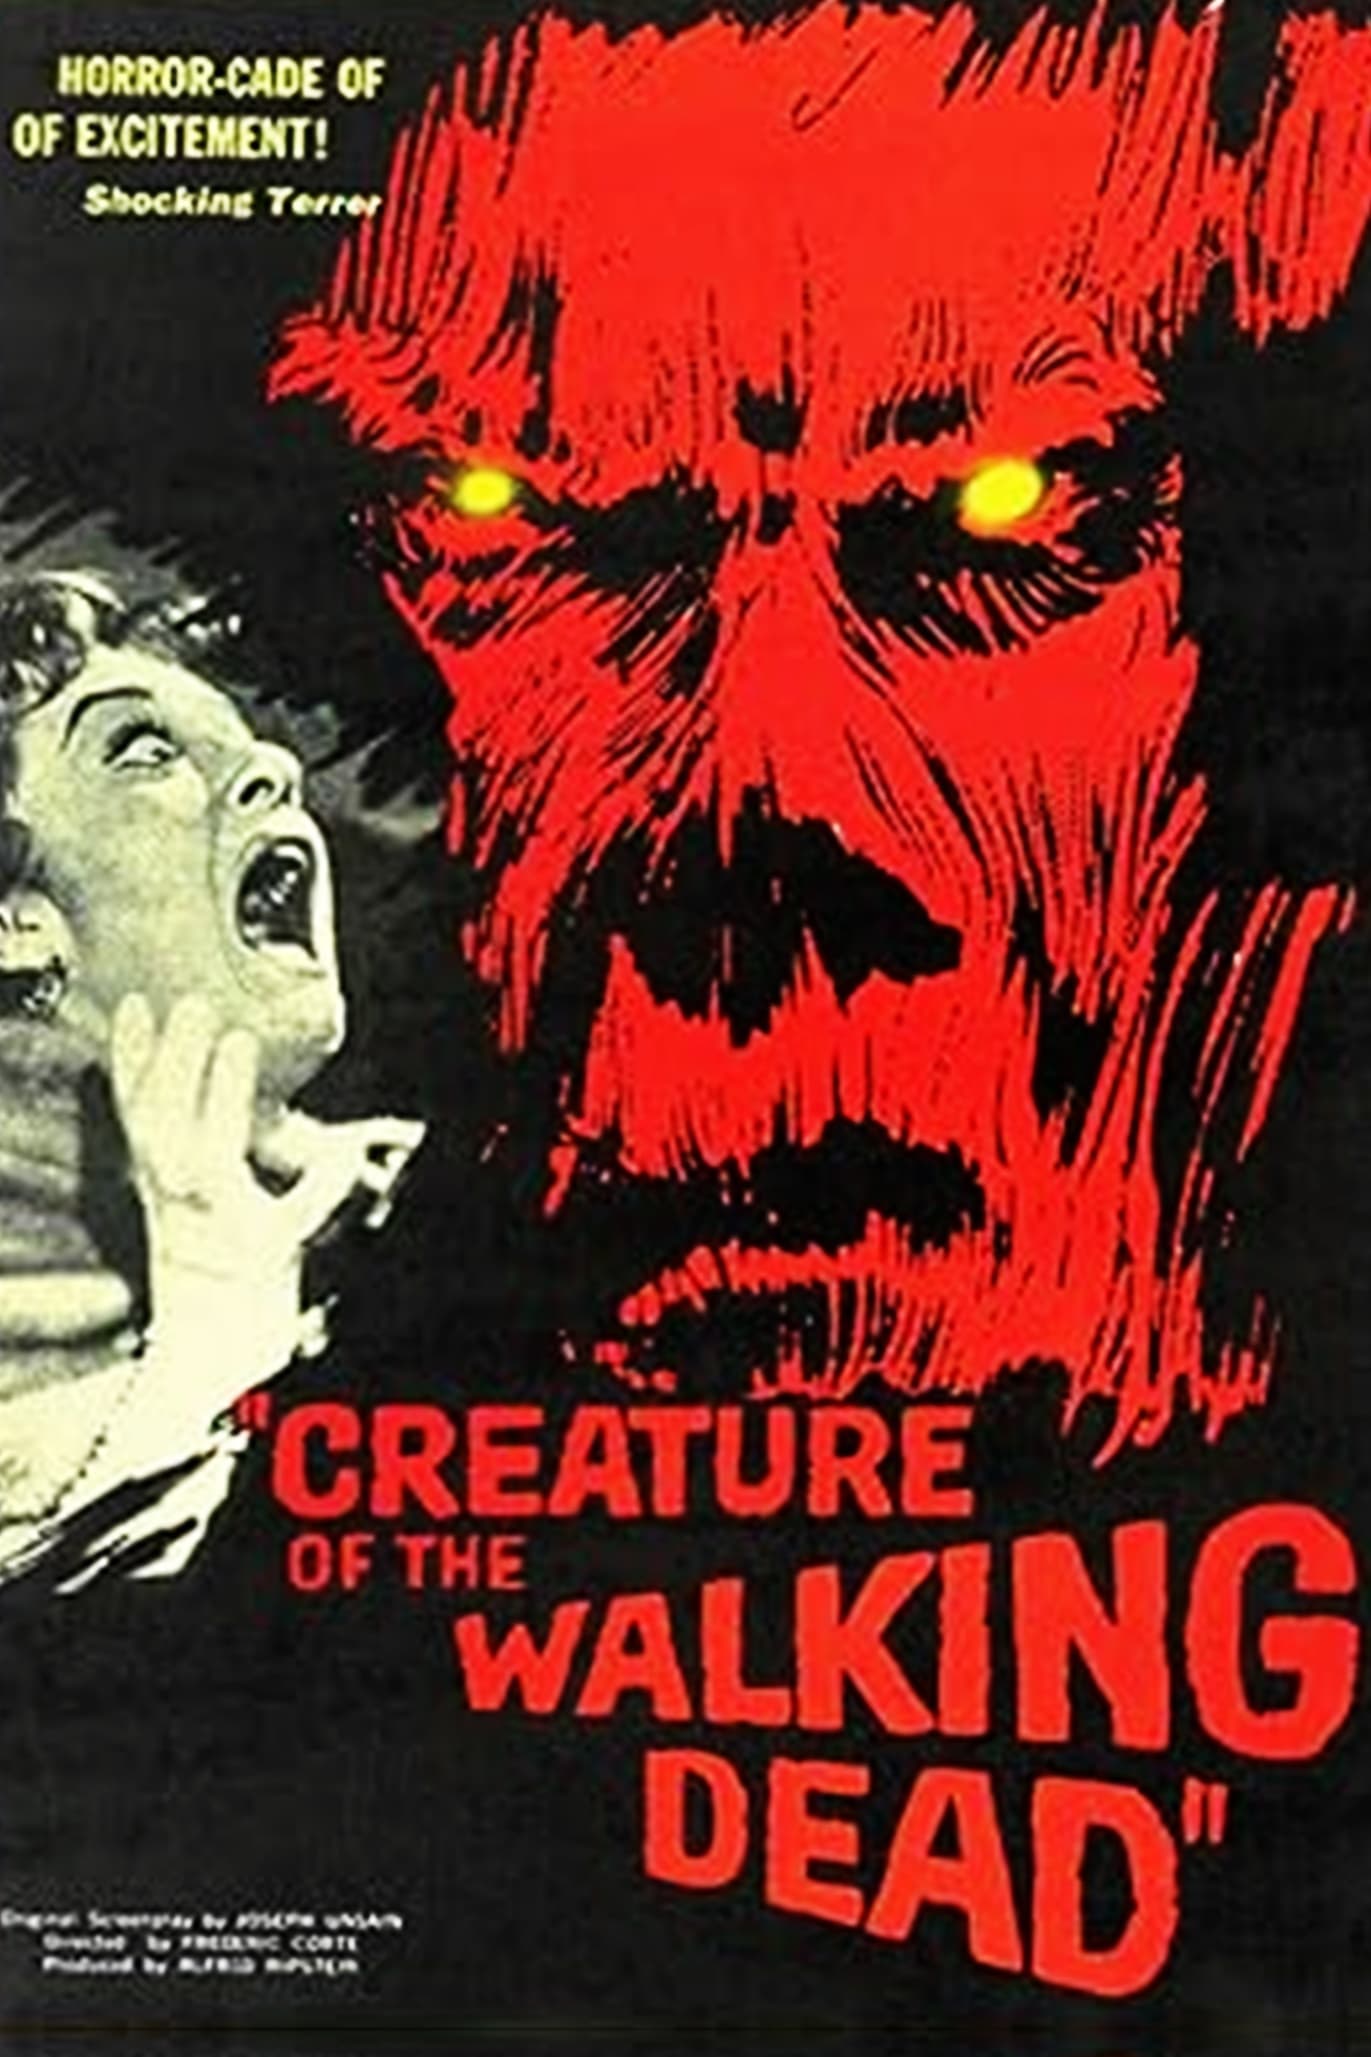 Creature of the Walking Dead (1965)